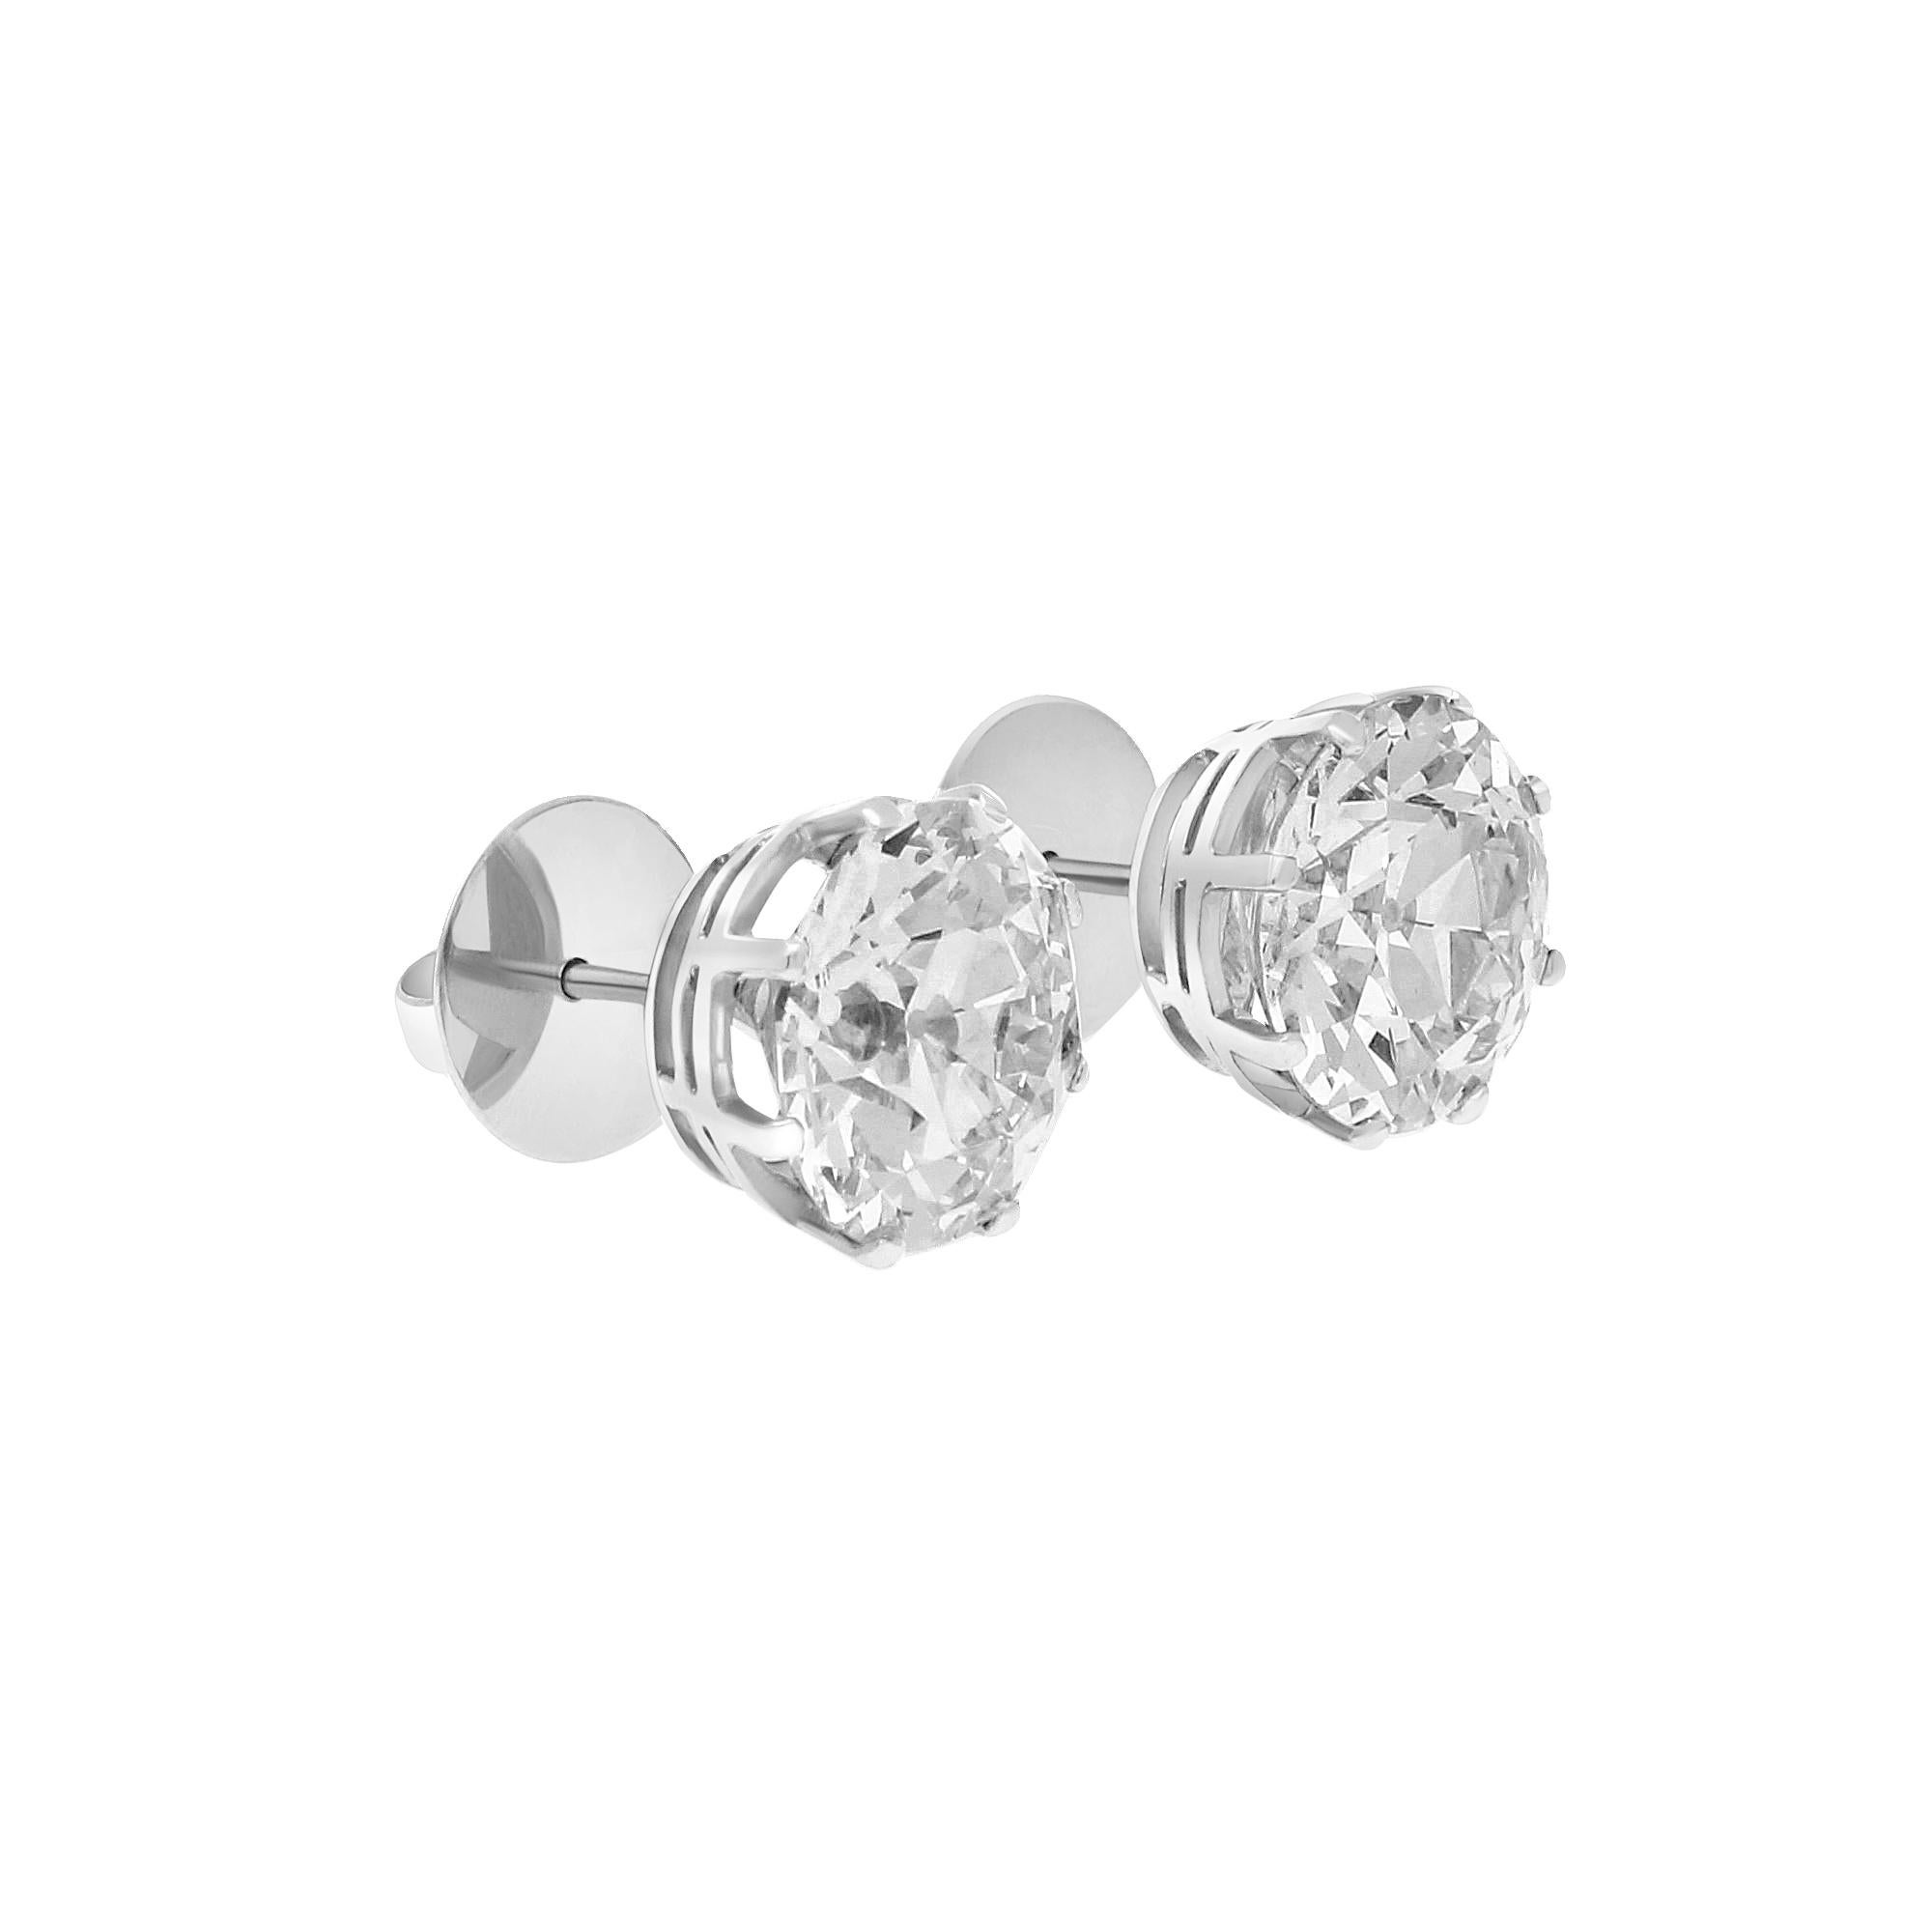 A magnificent pair of GIA certified old European diamond stud earrings set in platinum.
 
Matching perfectly in their incredible sparkle and brilliance, each earring features a GIA-certified old European brilliant-cut diamond of an incredible size.